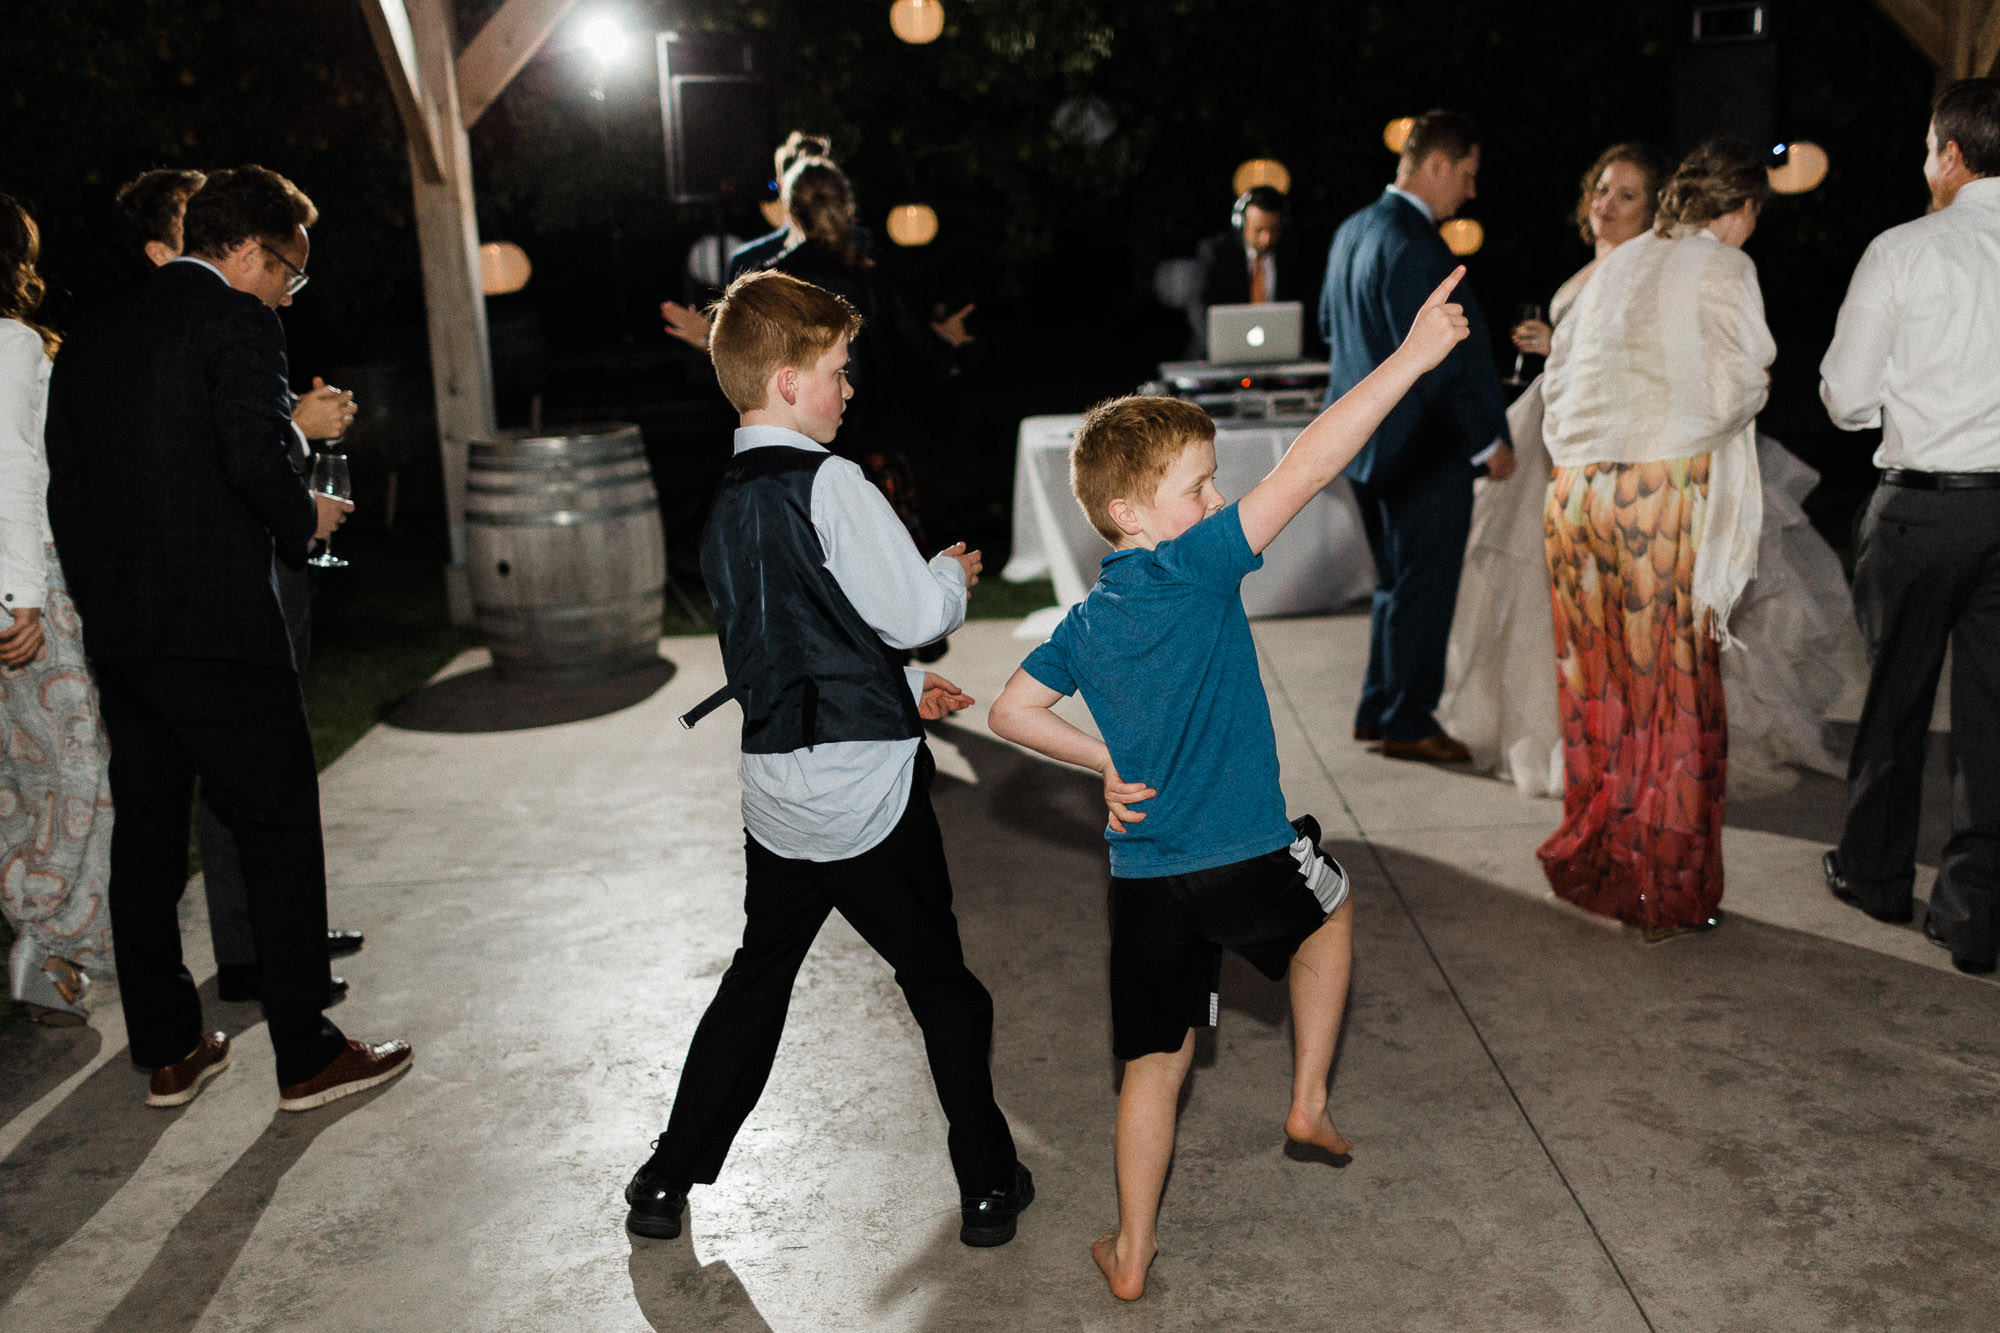 Wedding guests dance at Mt. View Orchards in Mt Hood, Oregon.